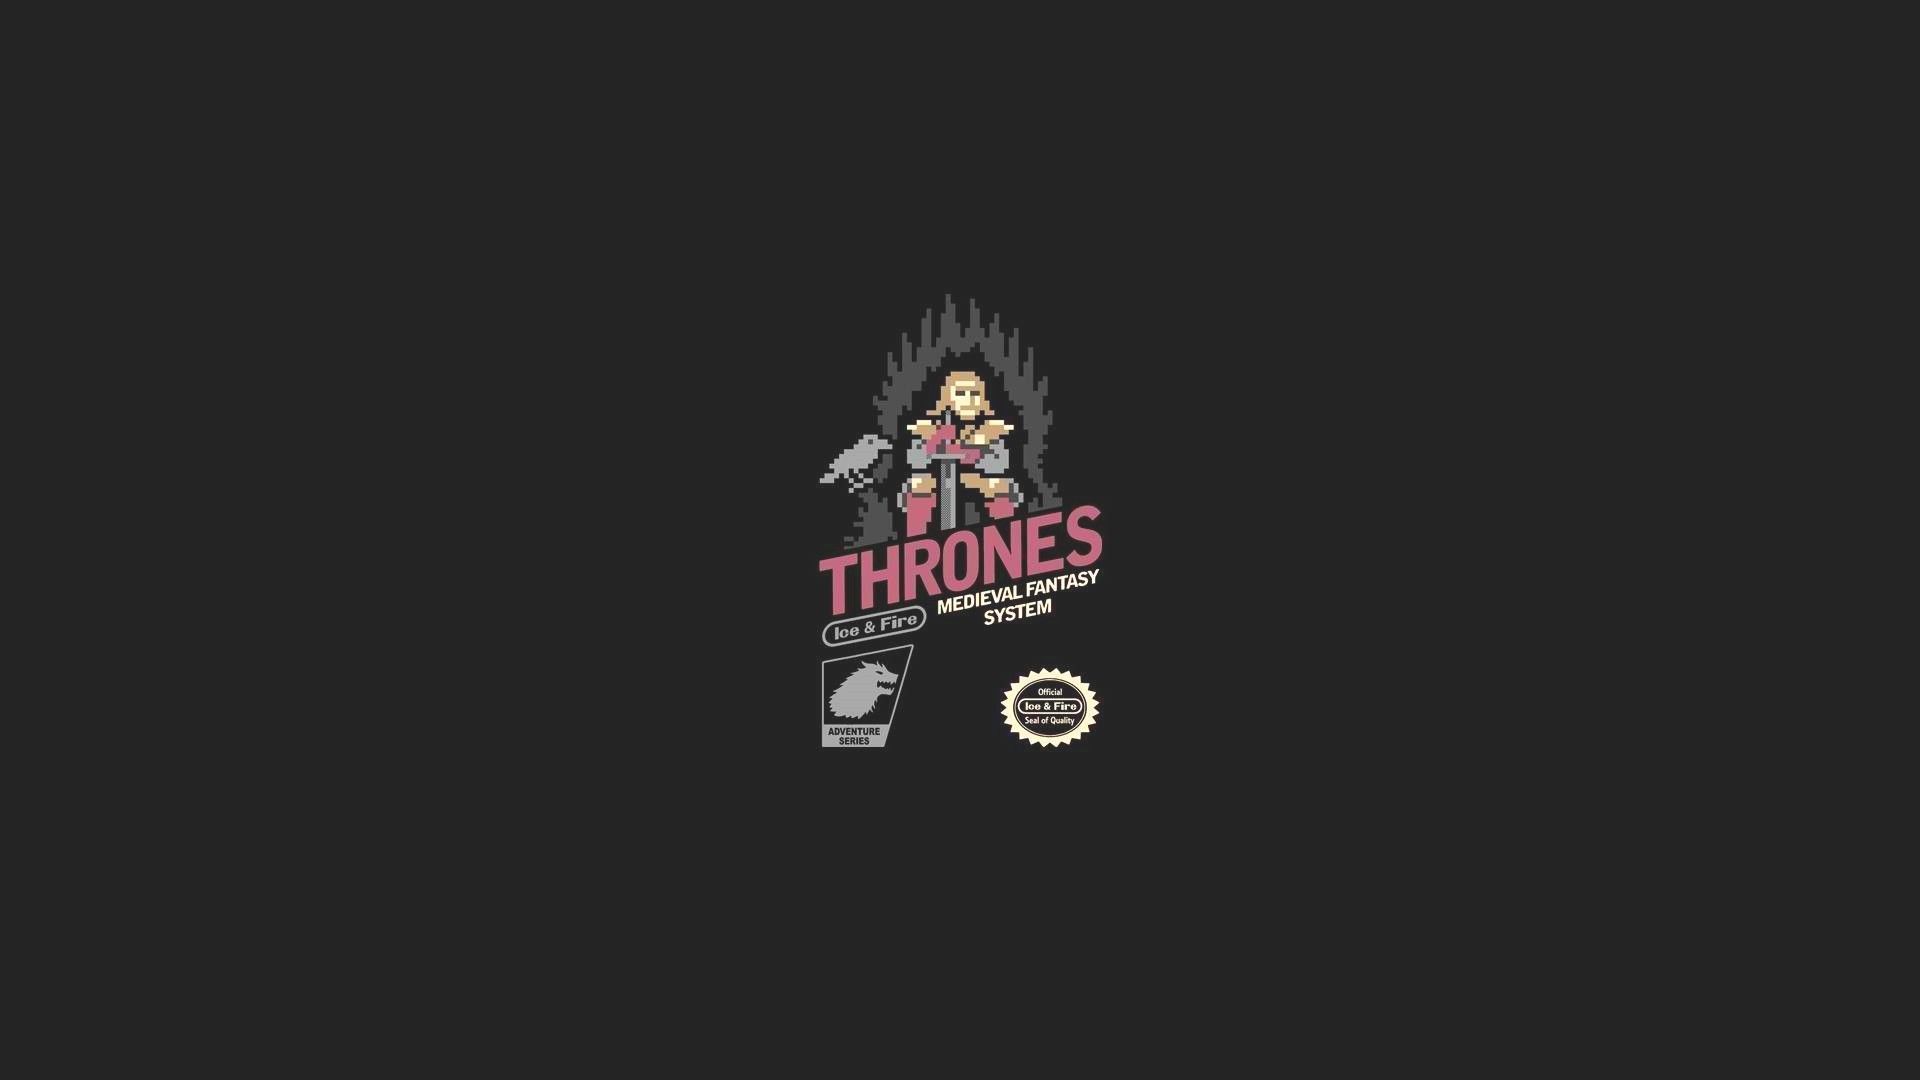 Game of Thrones Minimalist Wallpaper Free Game of Thrones